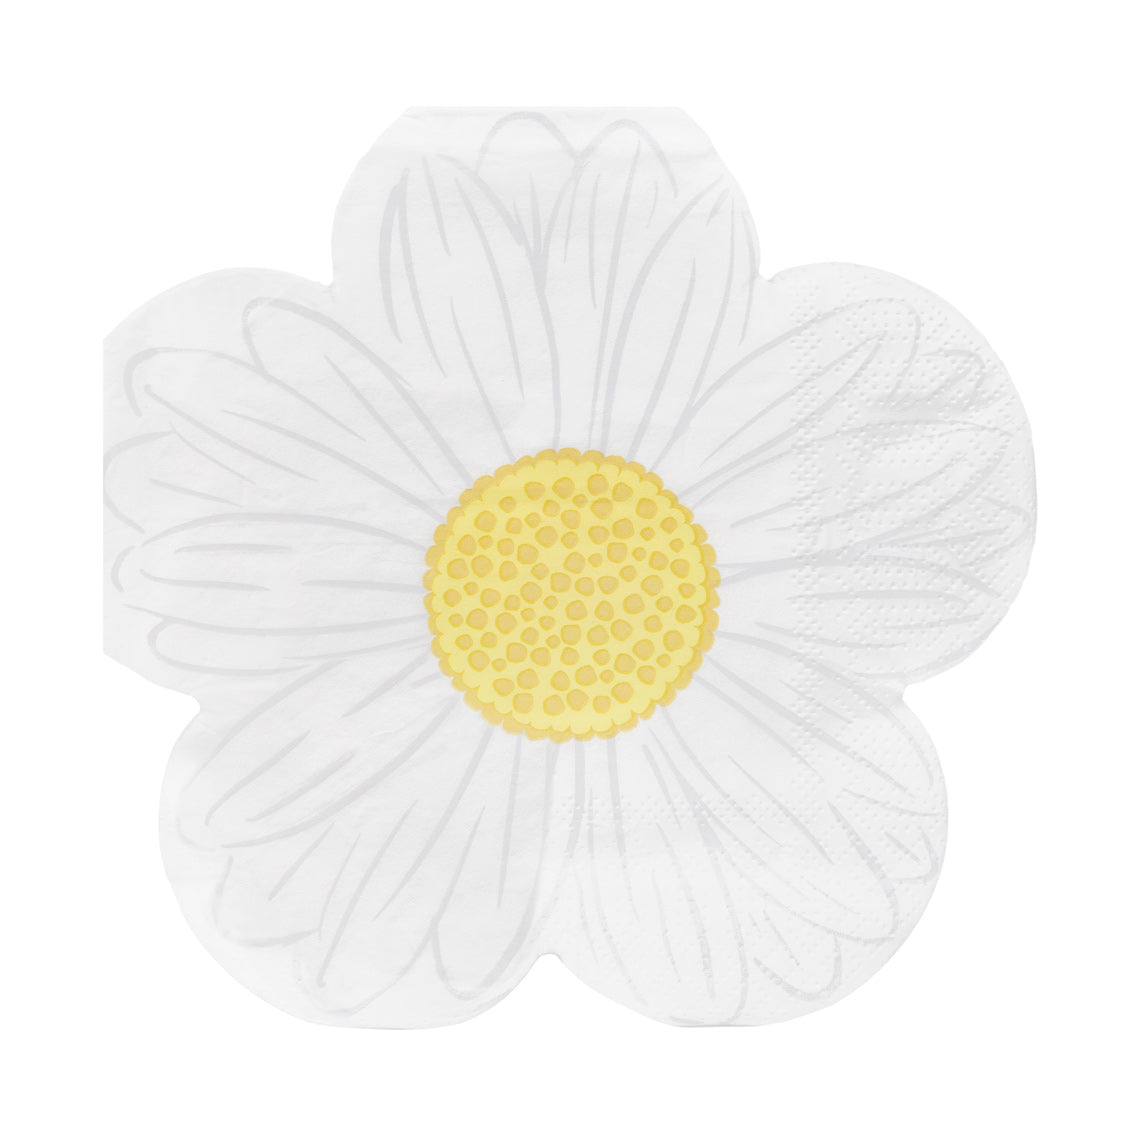 Mellow Daisy Paper Napkins - 20 Pack by penny black